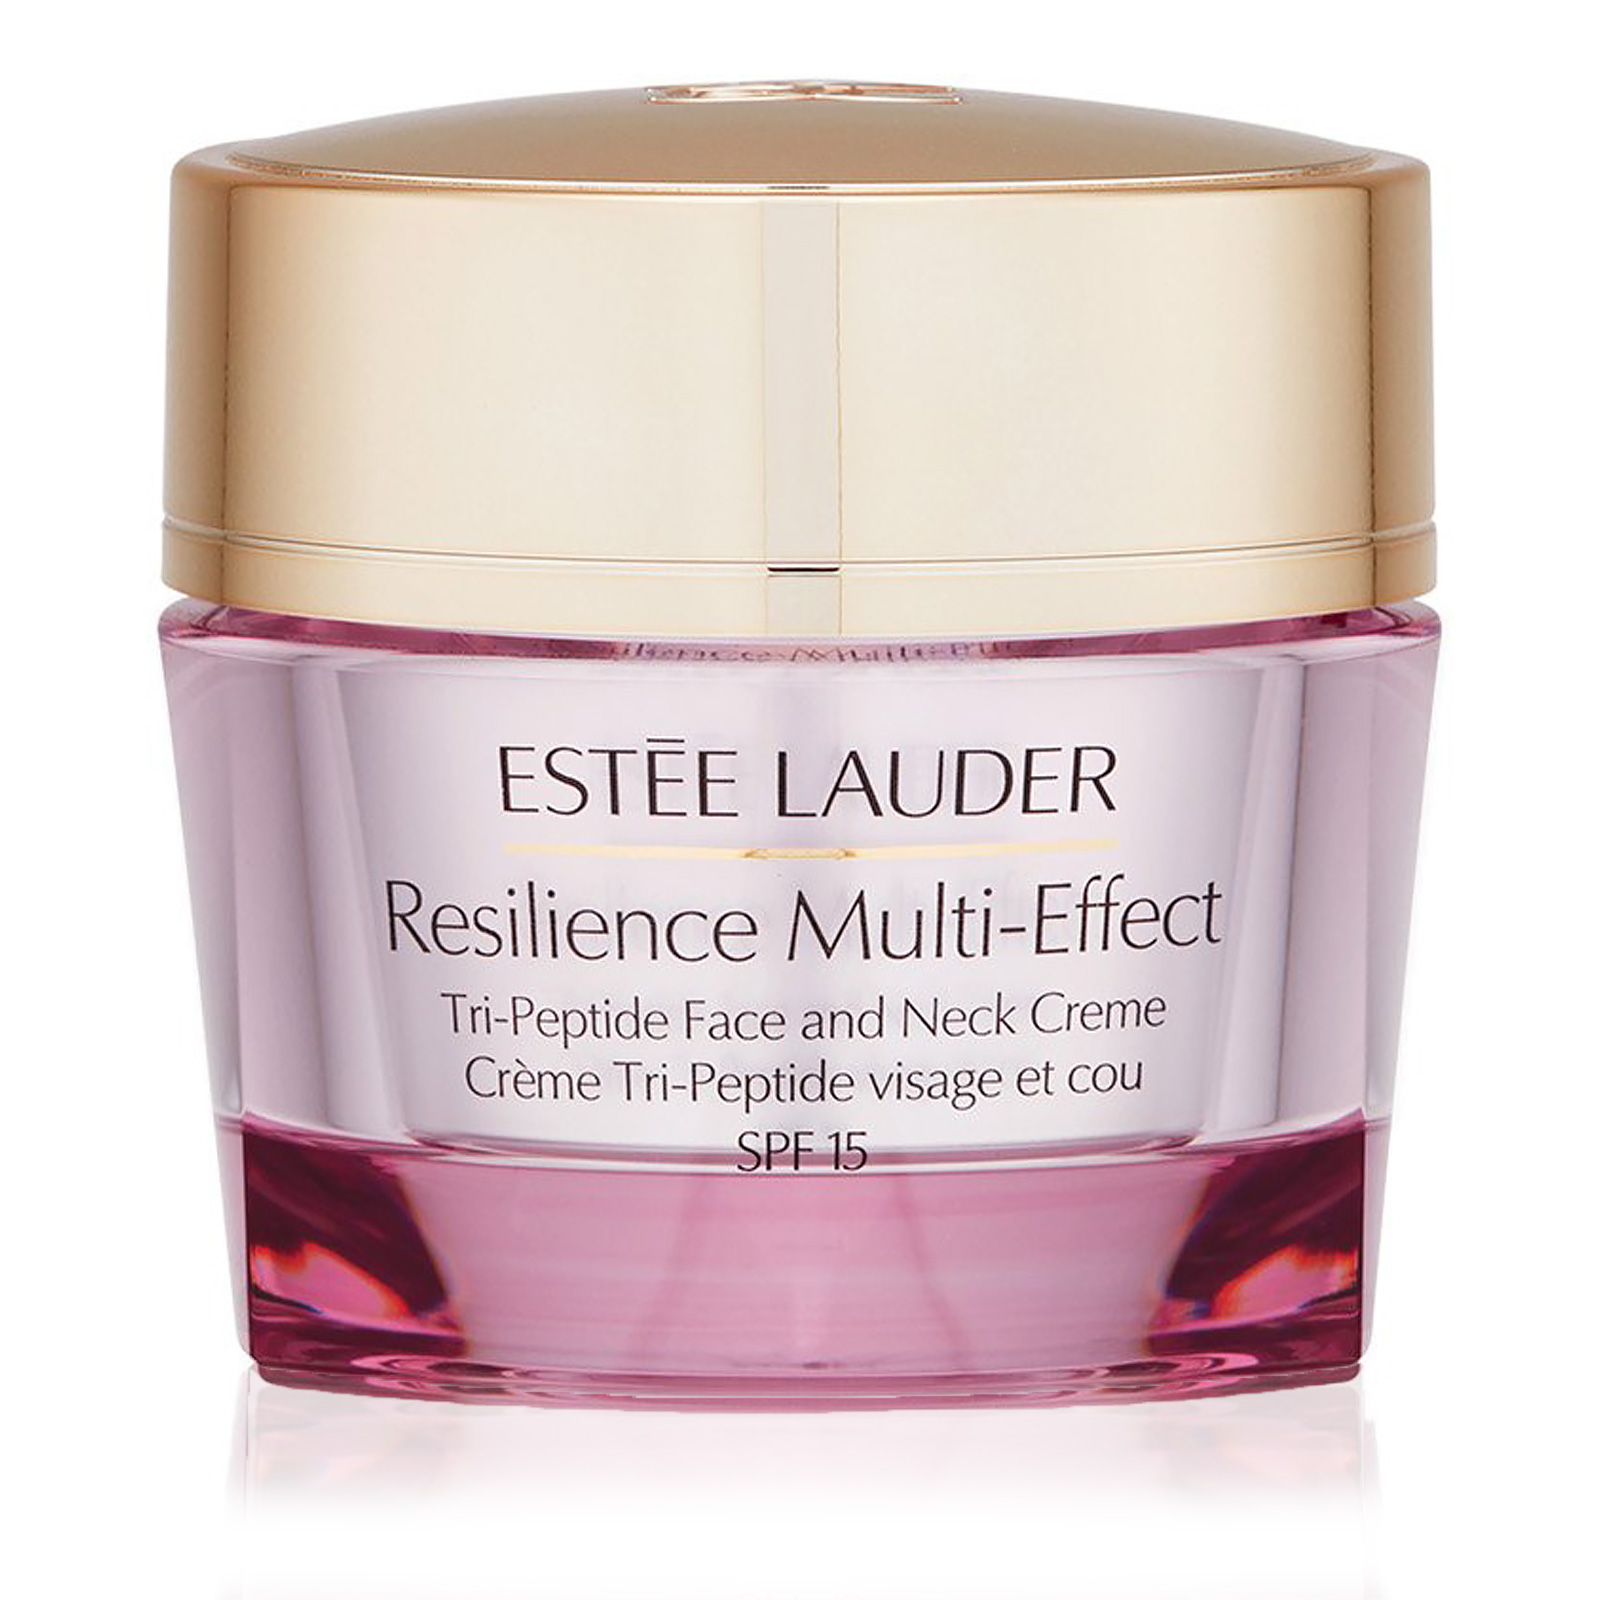 Resilience Multi-Effect Tri-Peptide Face and Neck Creme SPF15 (Normal/ Combination Skin)